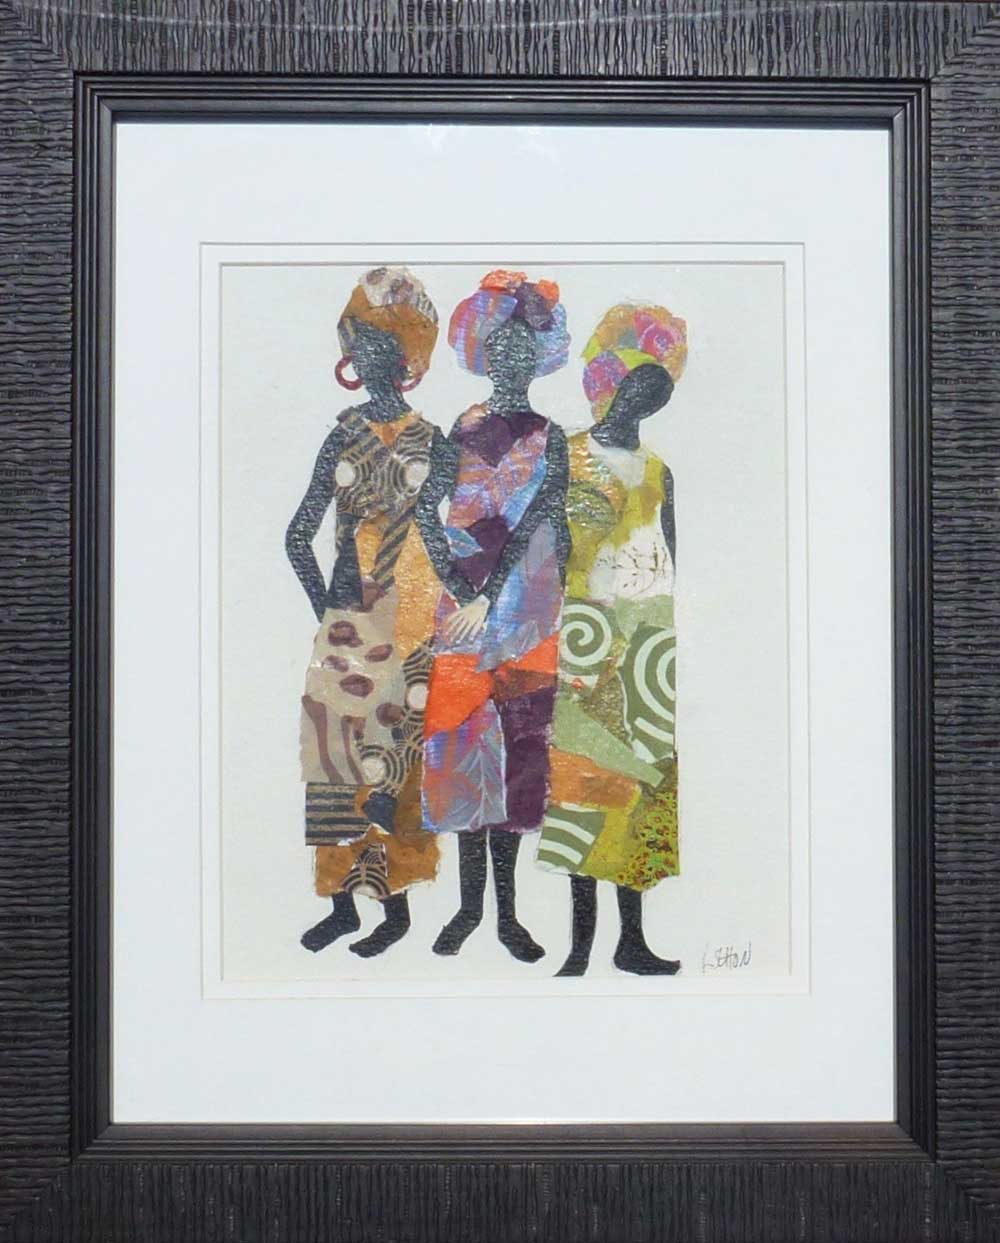 Watercolor painting and collage of Three women